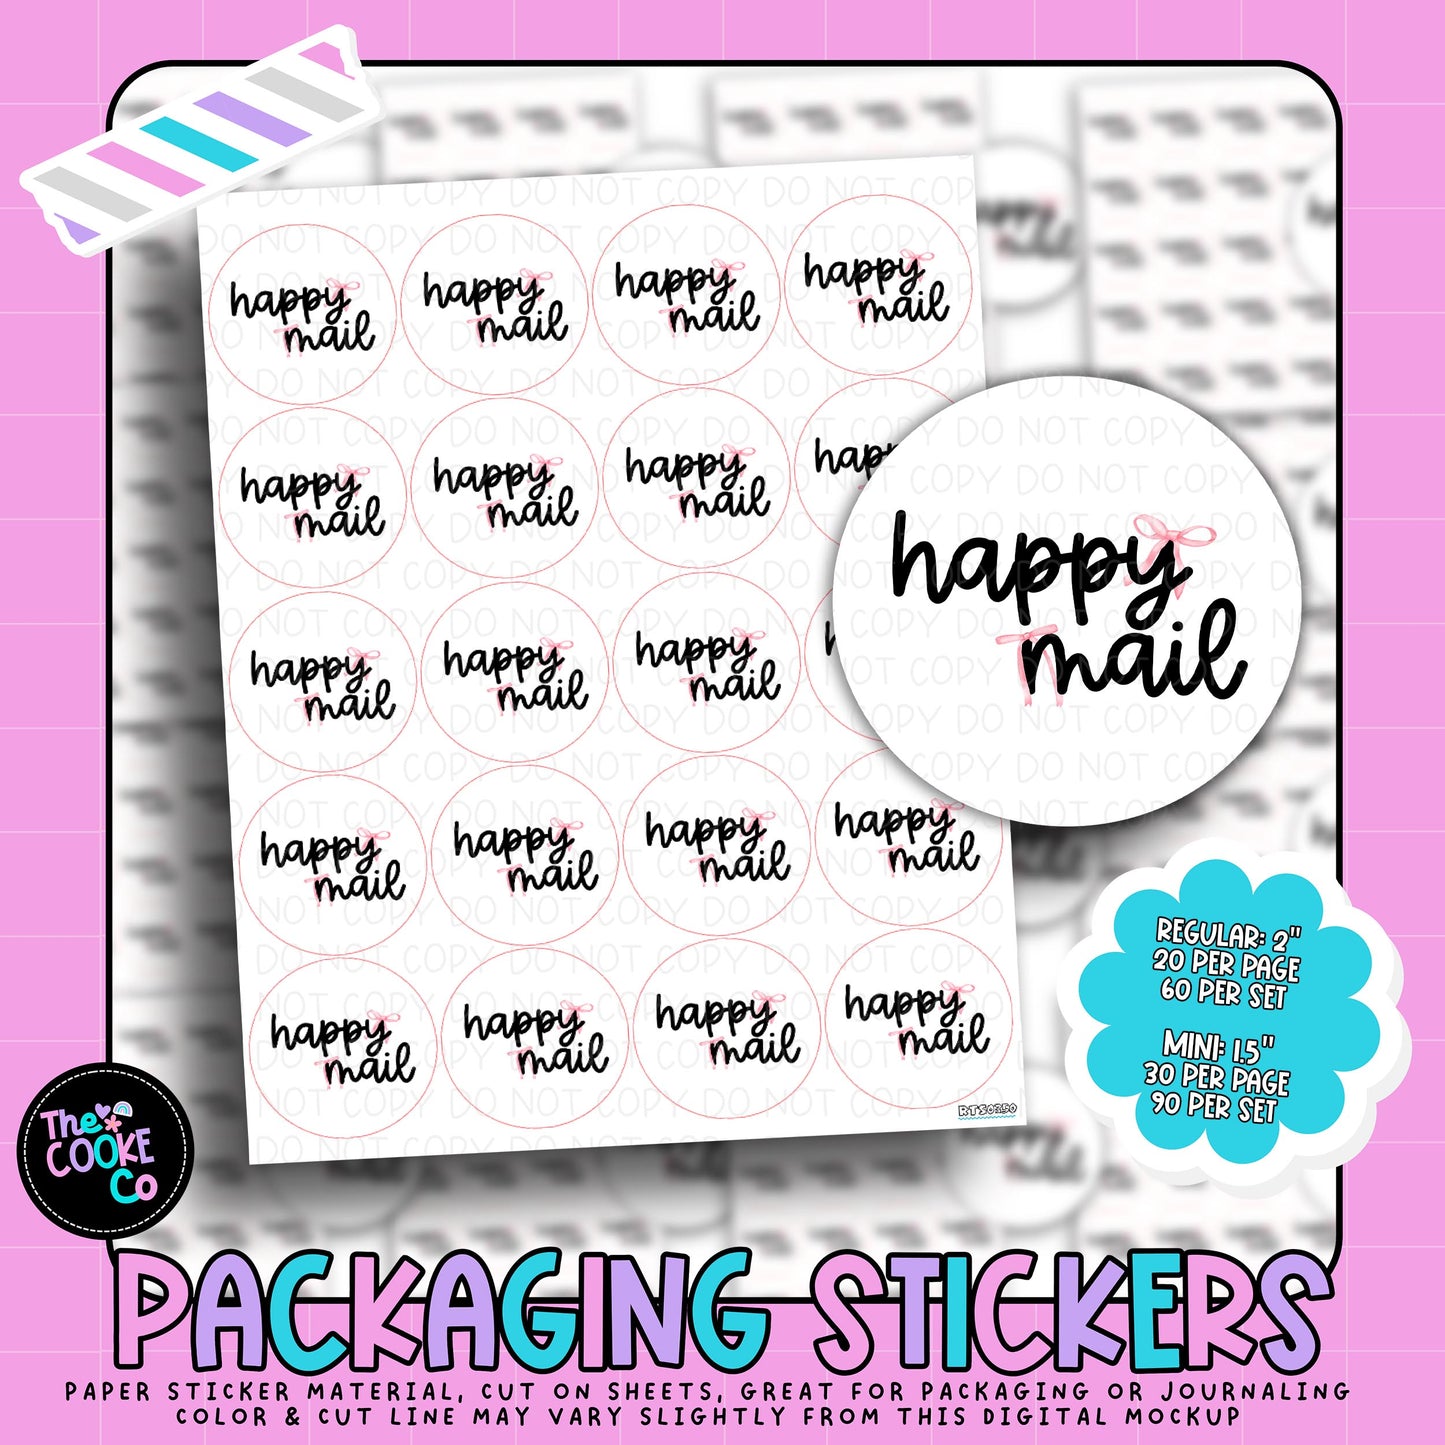 Packaging Stickers | #RTS0350 - HAPPY MAIL